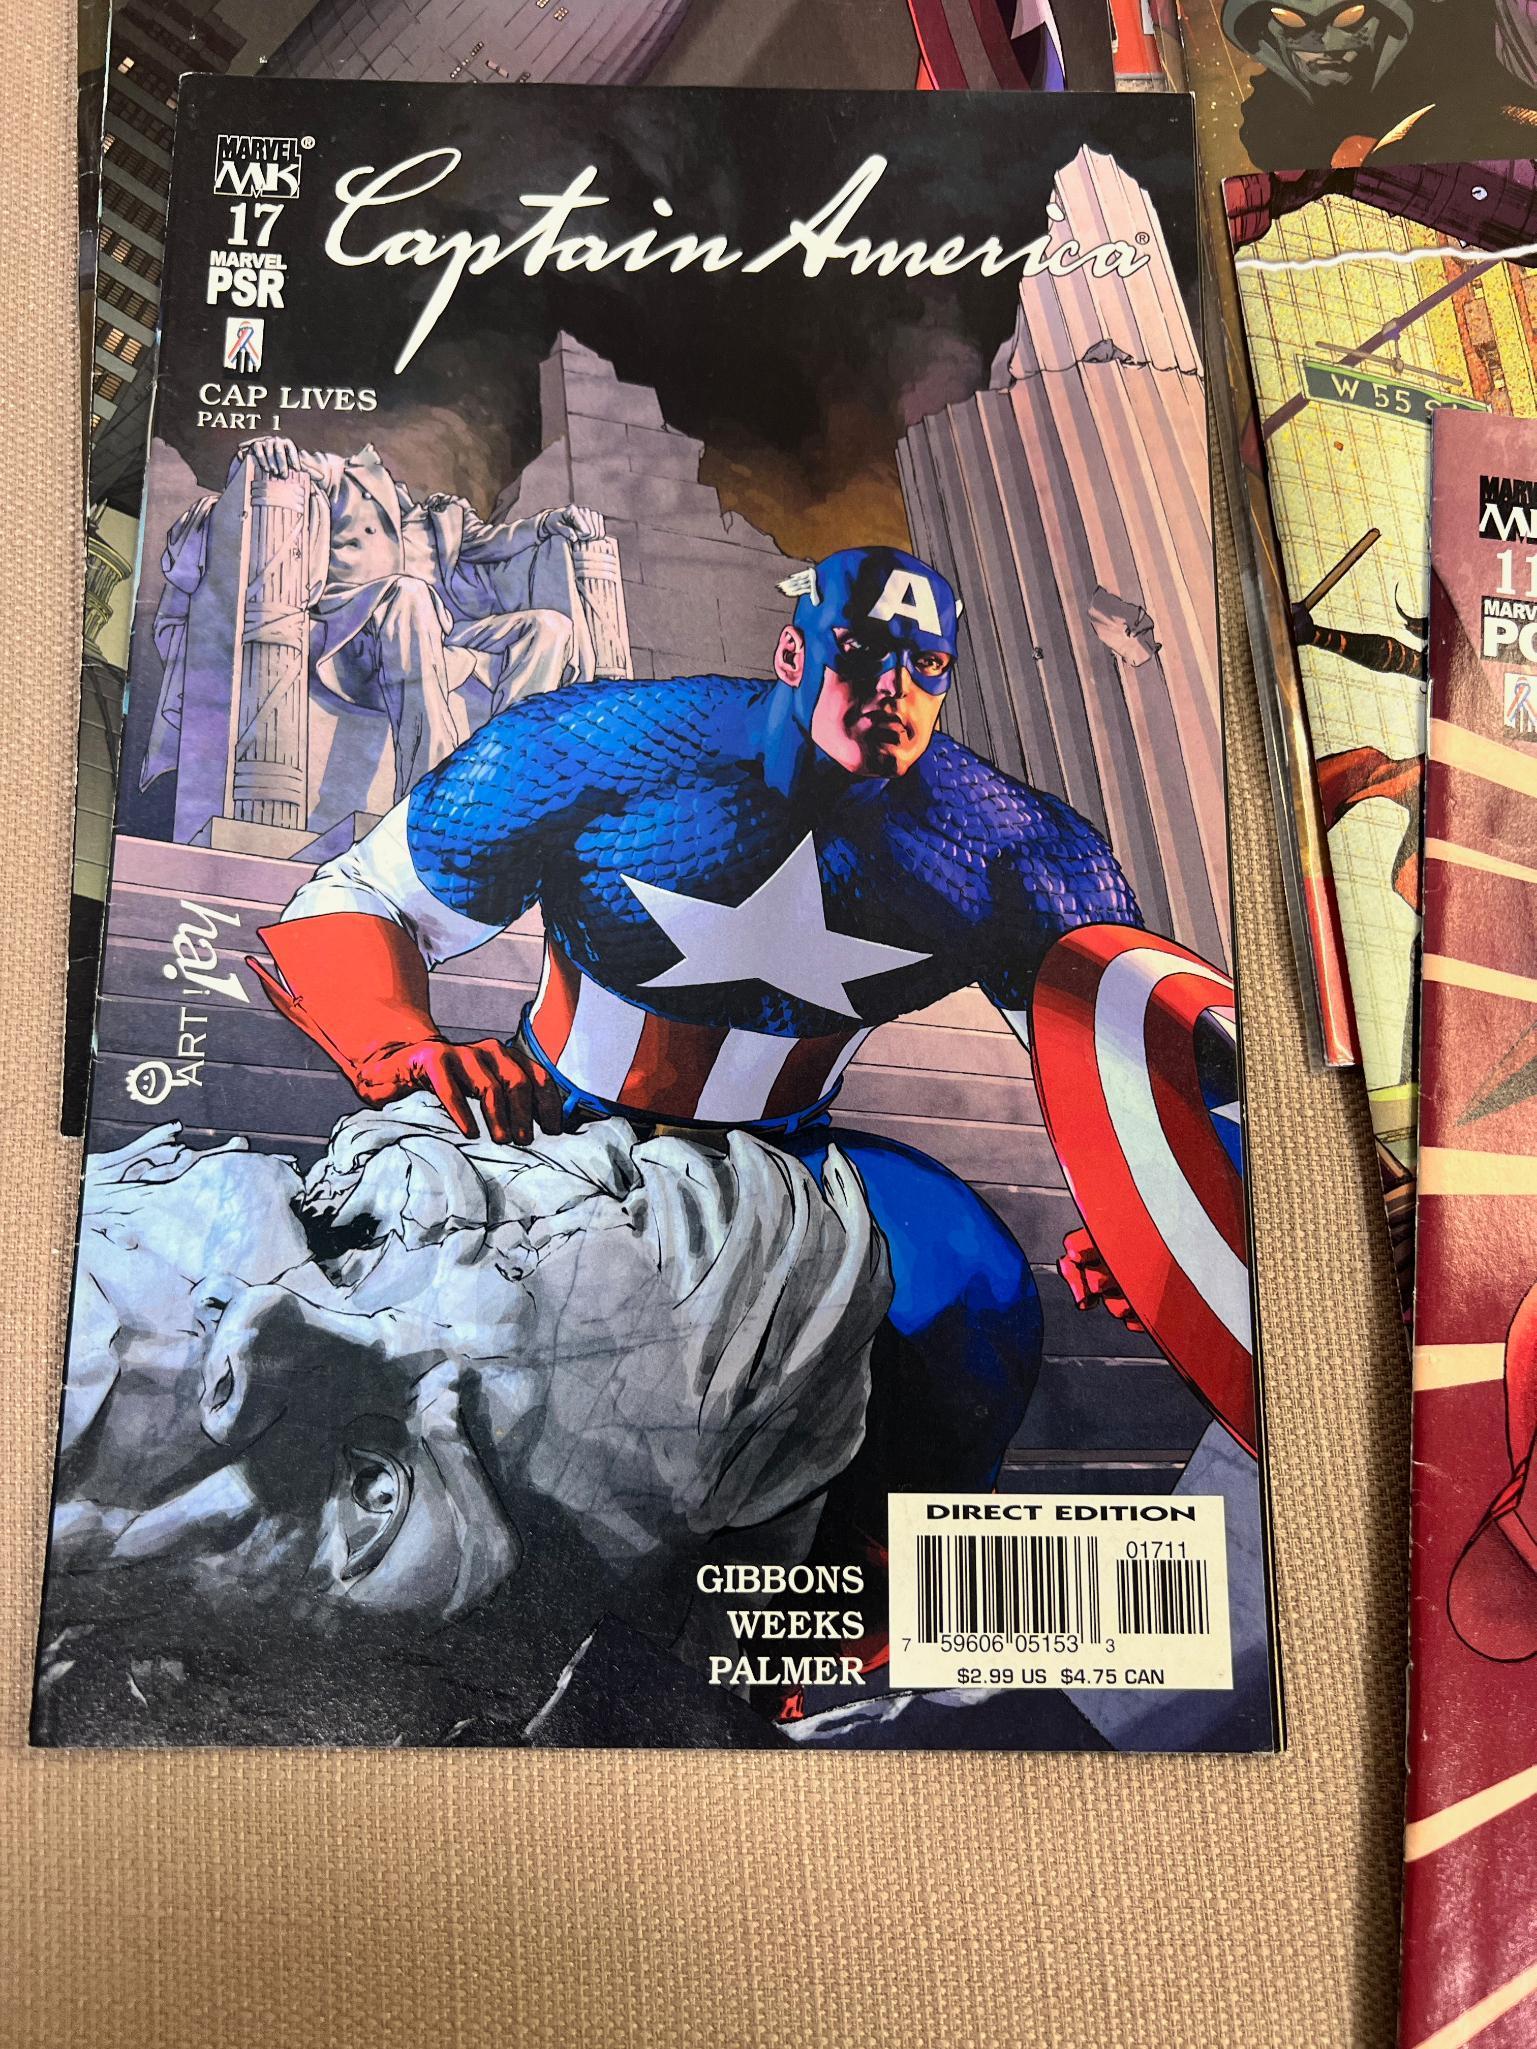 19- Captain America comic books some early and some newer, see all pics